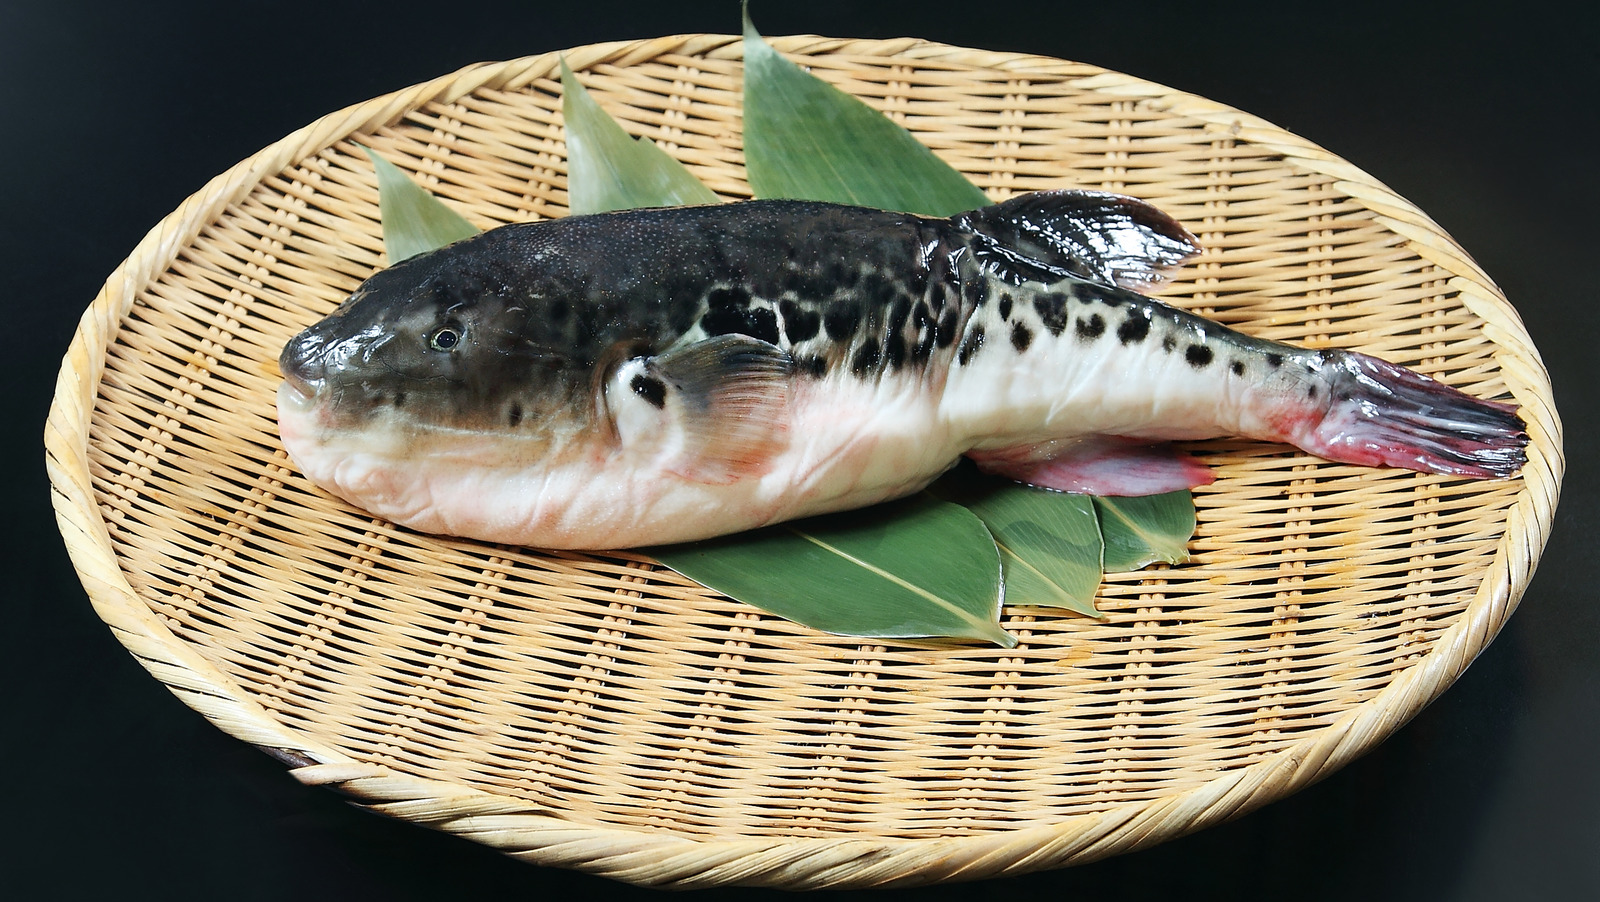 How Long You Have To Study In Japan To Cook Puffer Fish